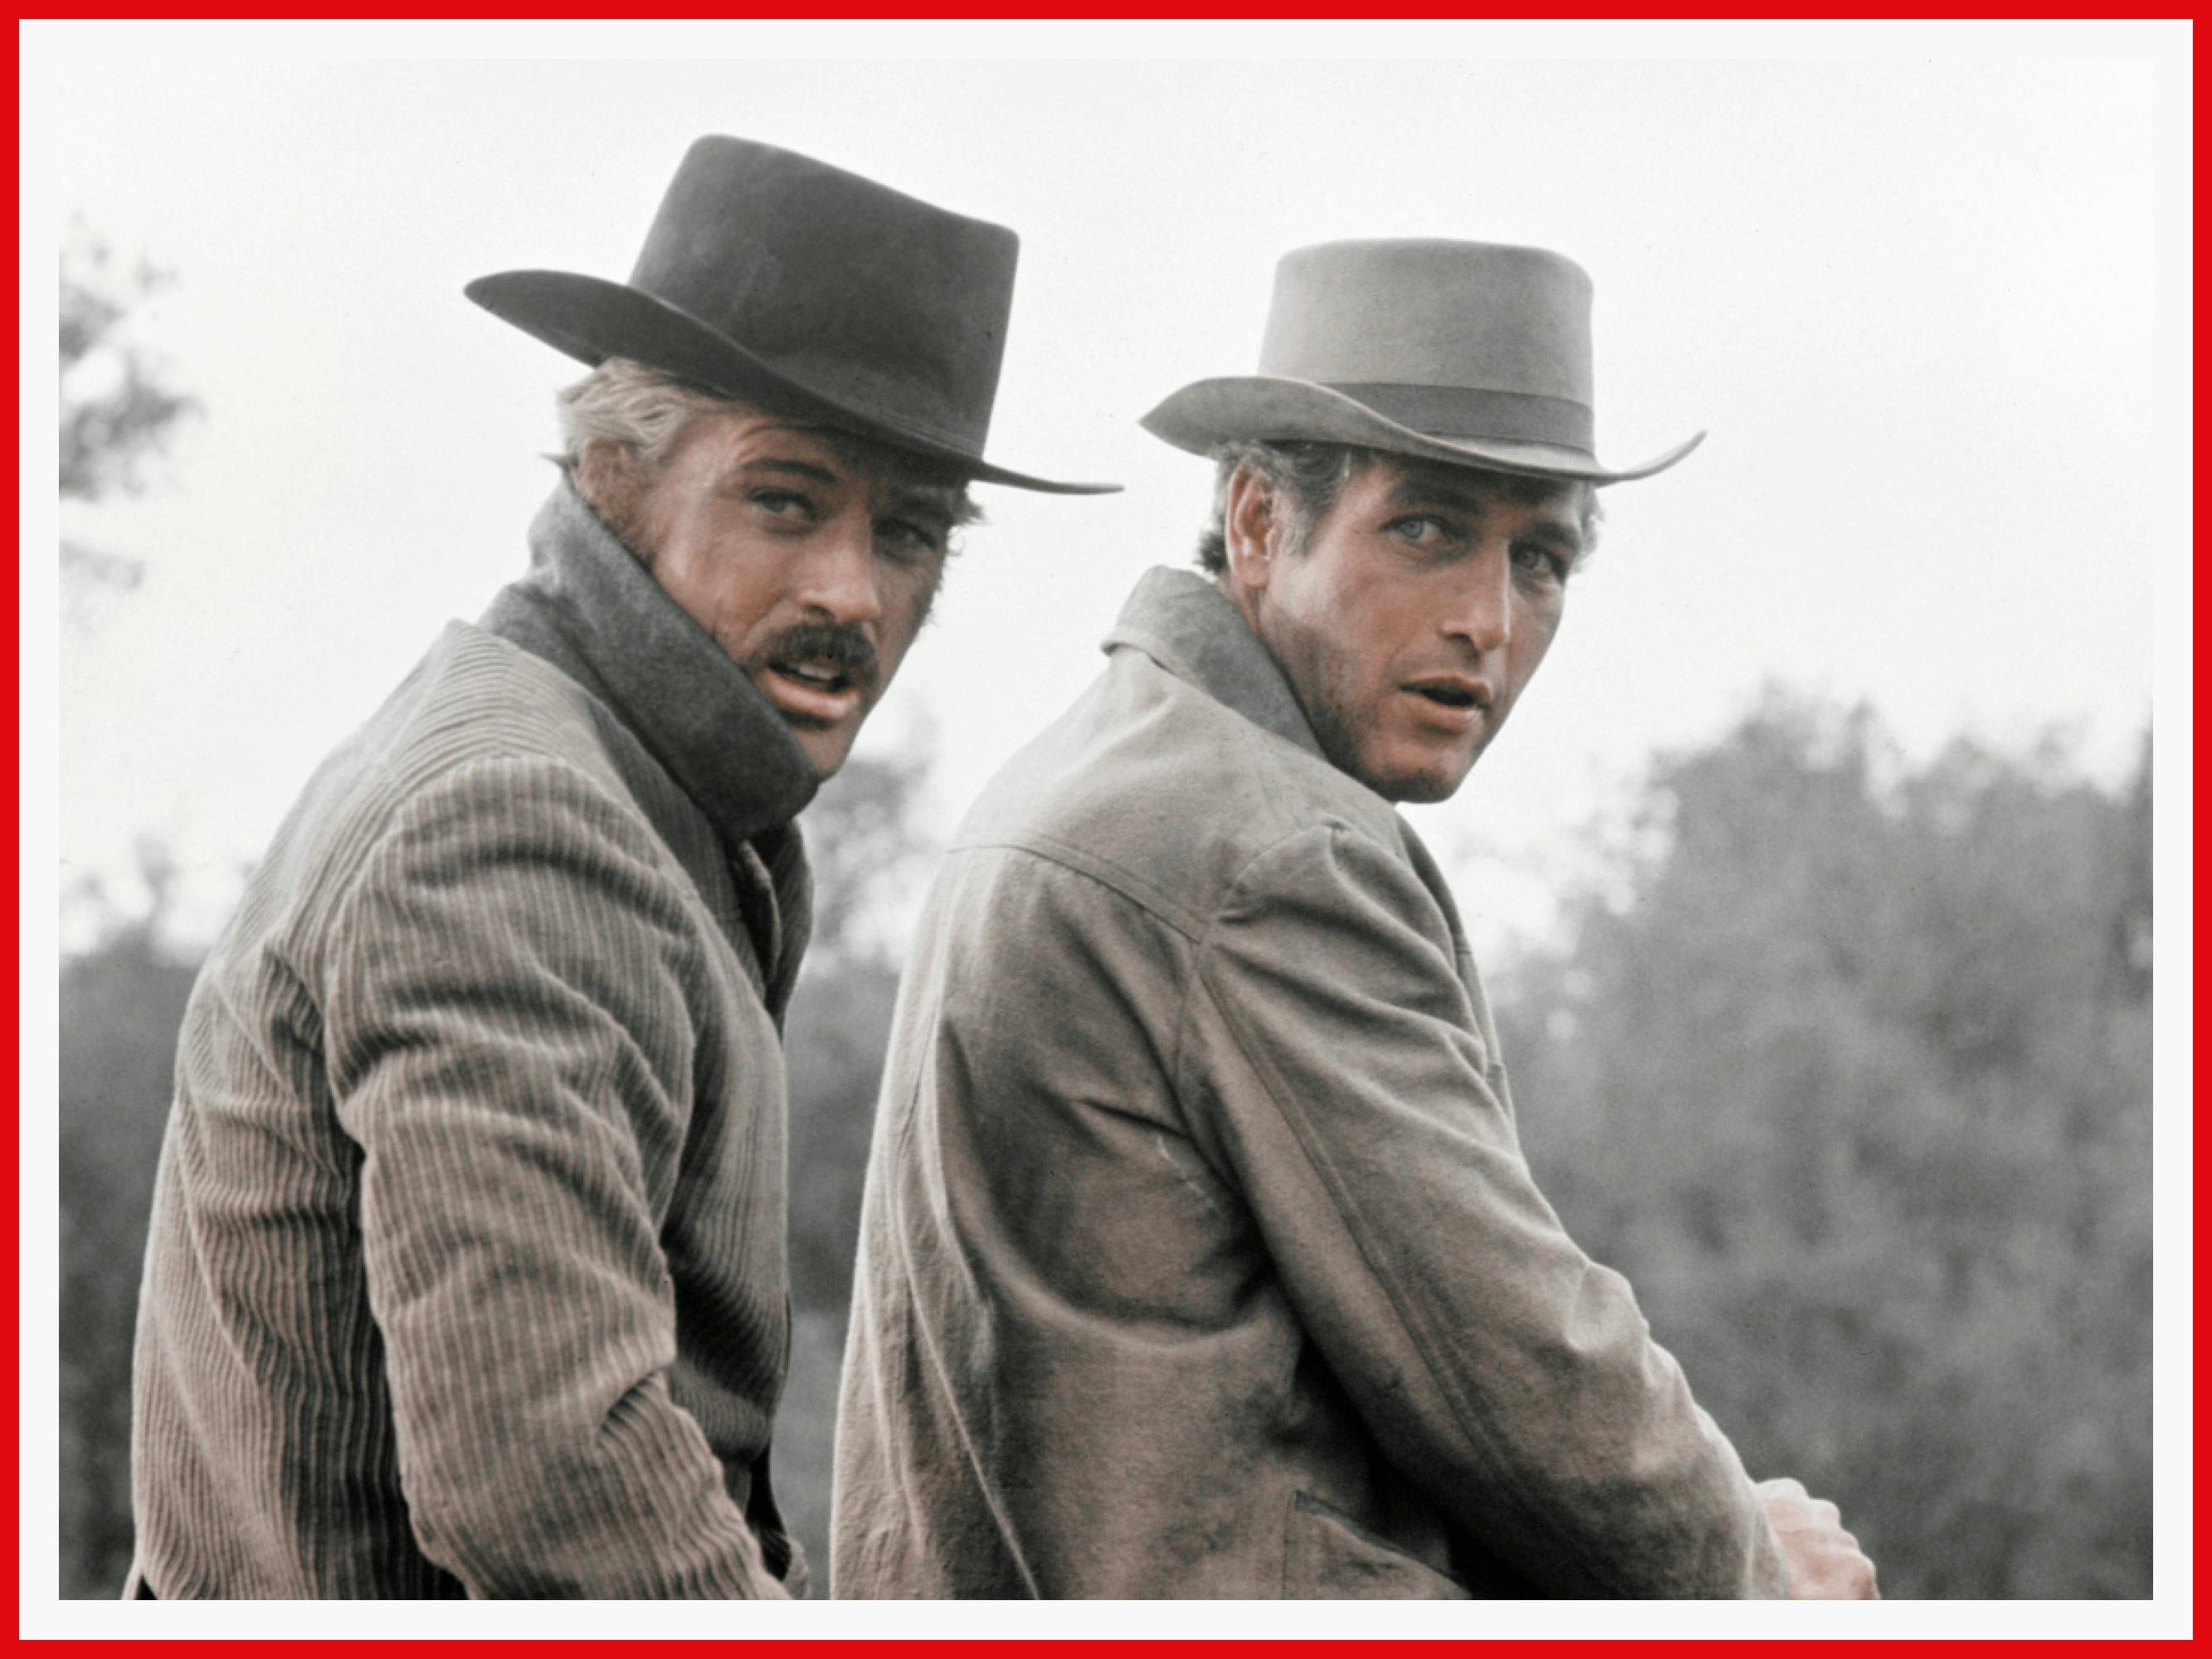 A still from the film. Robert Redford and Paul Newman ride through the Wild West.